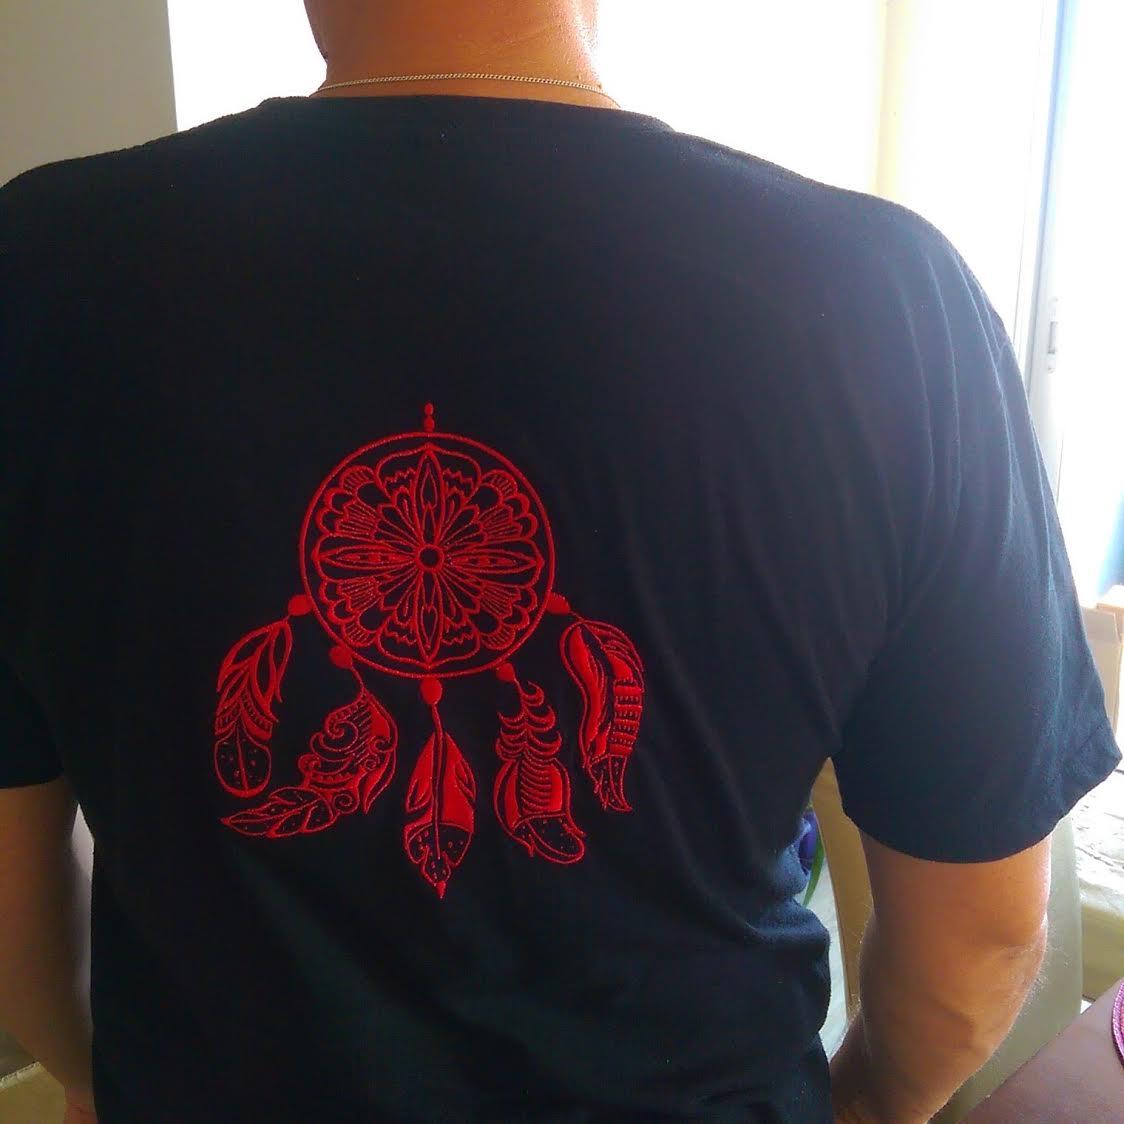 Embroidered t-shirt with dreamcatcher design